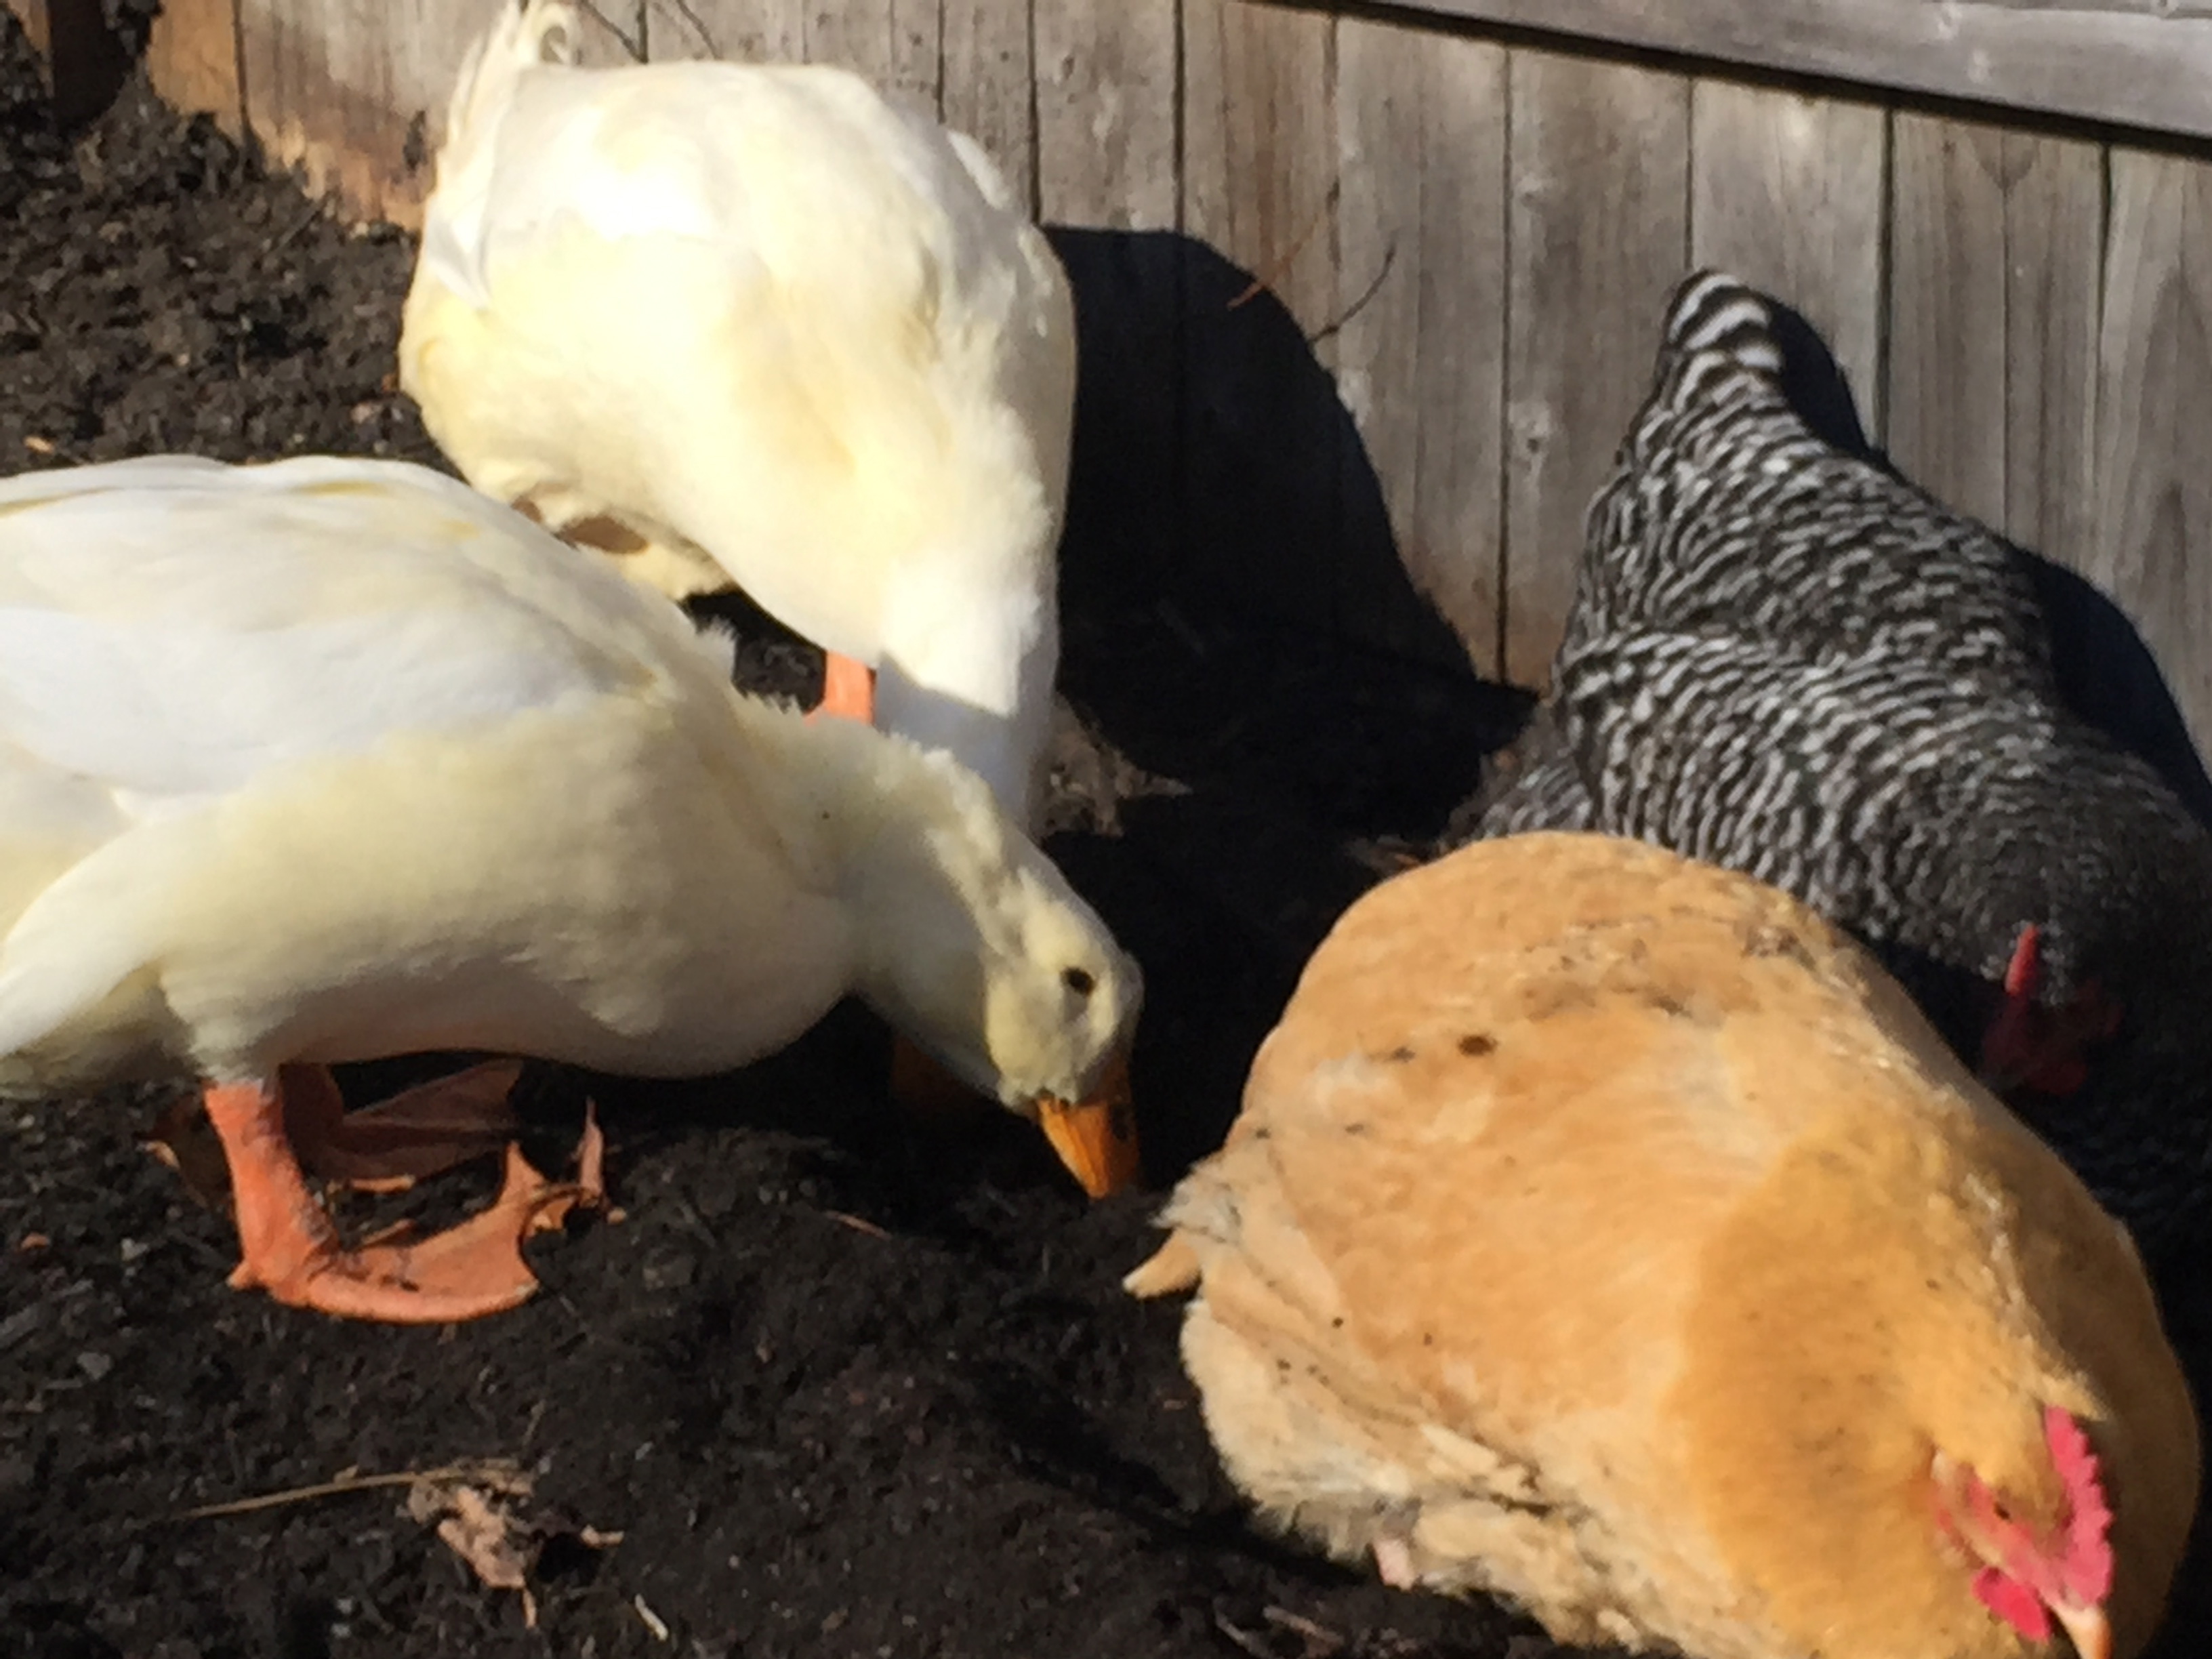 The ducks are jerks- they wait until the chickens have a good dust bath going, then root around in the loose dirt under them.